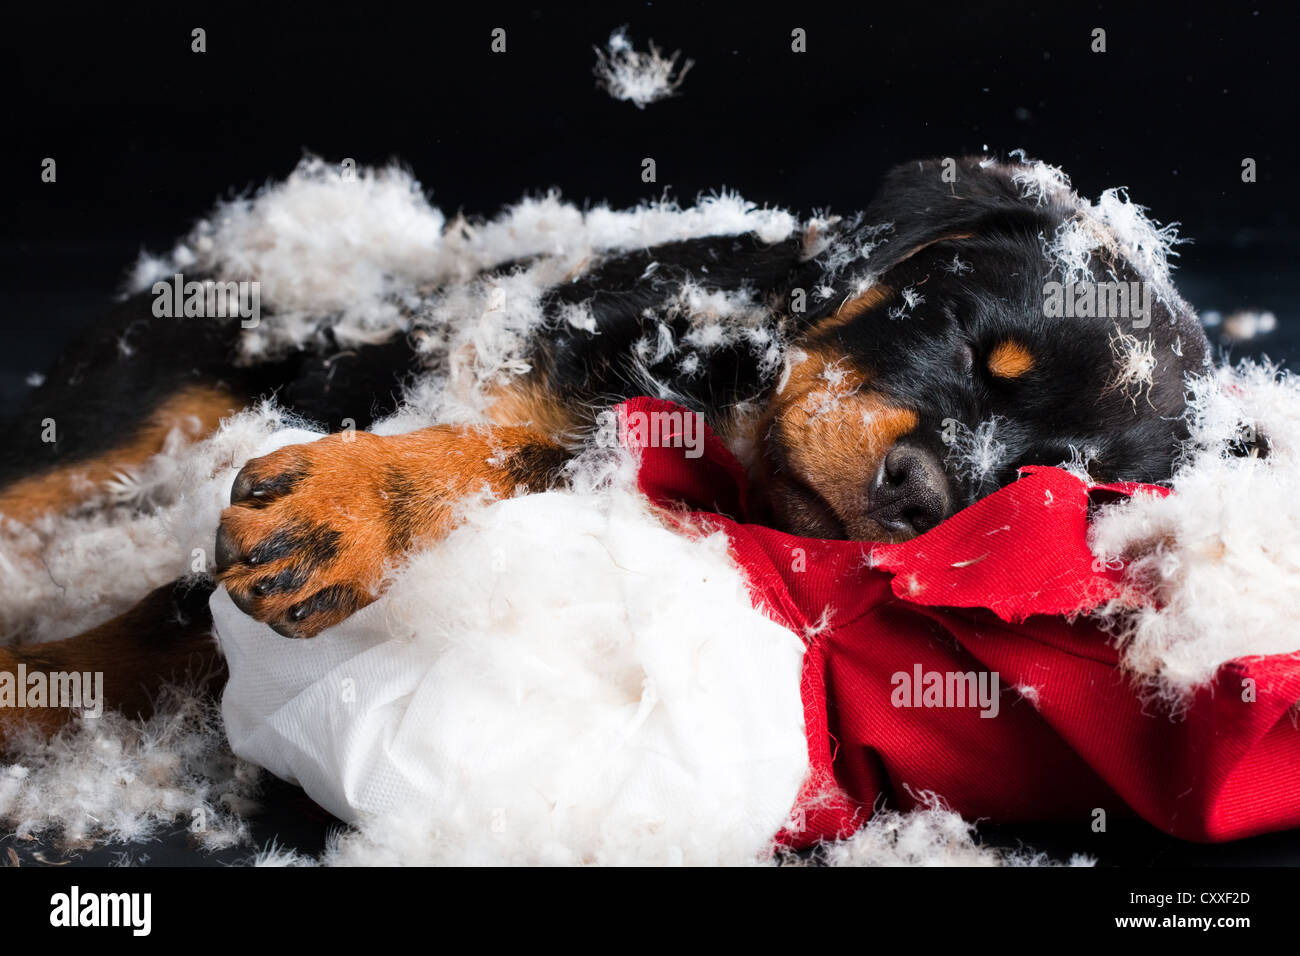 Rottweiler puppy sleeping on a torn pillow and stuffing, North Tyrol, Austria, Europe Stock Photo